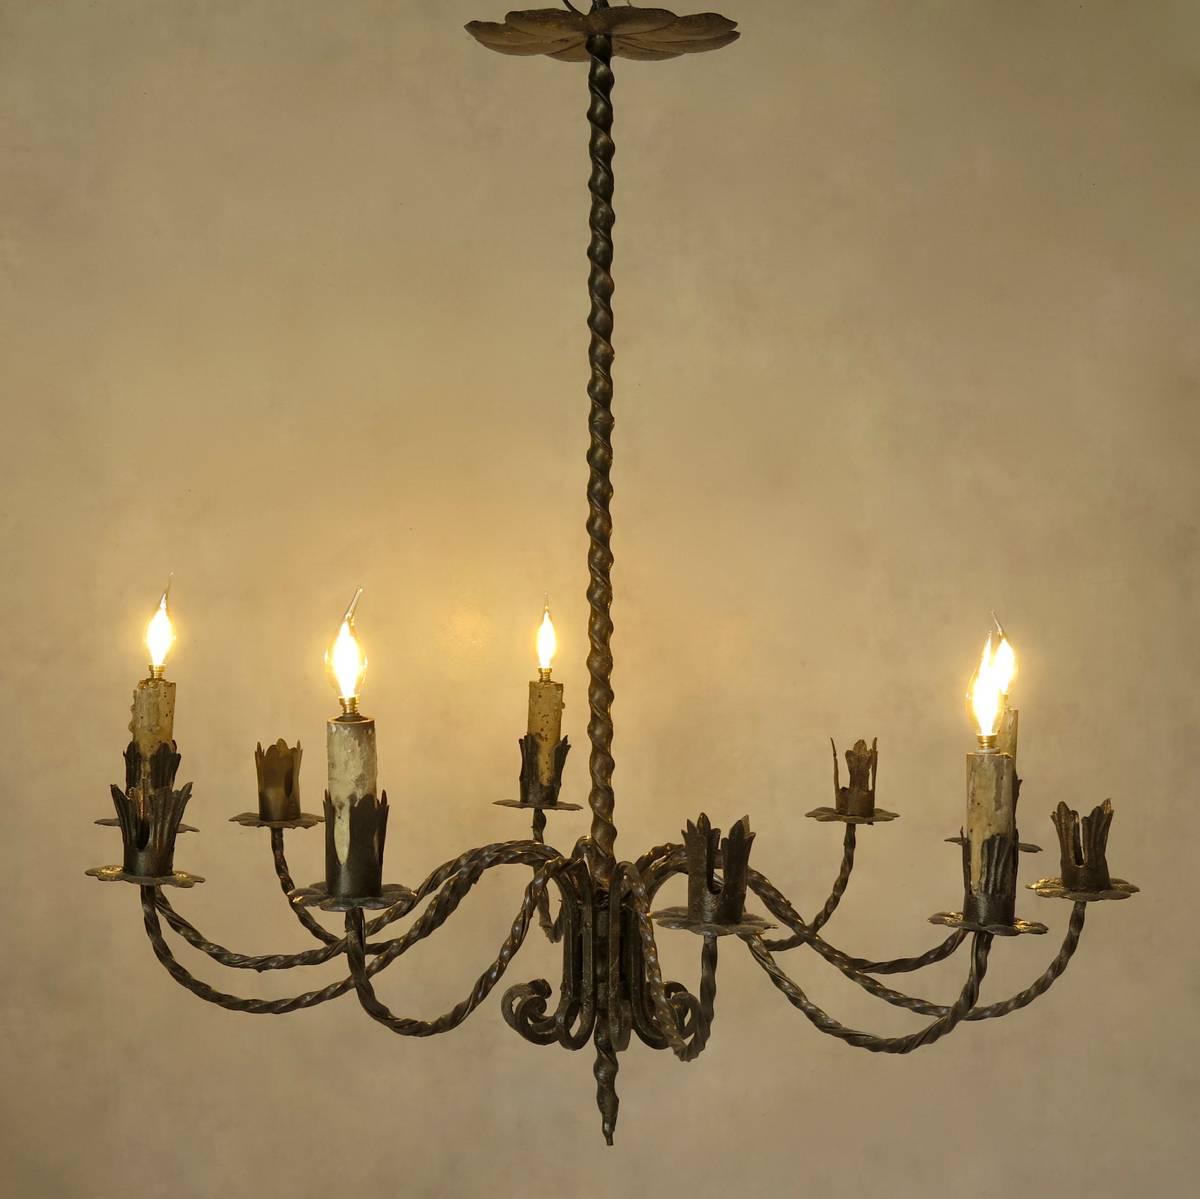 Large and elegant twisted iron ten-light chandelier. Every other arm is fitted with an antique painted wood candle and wired.